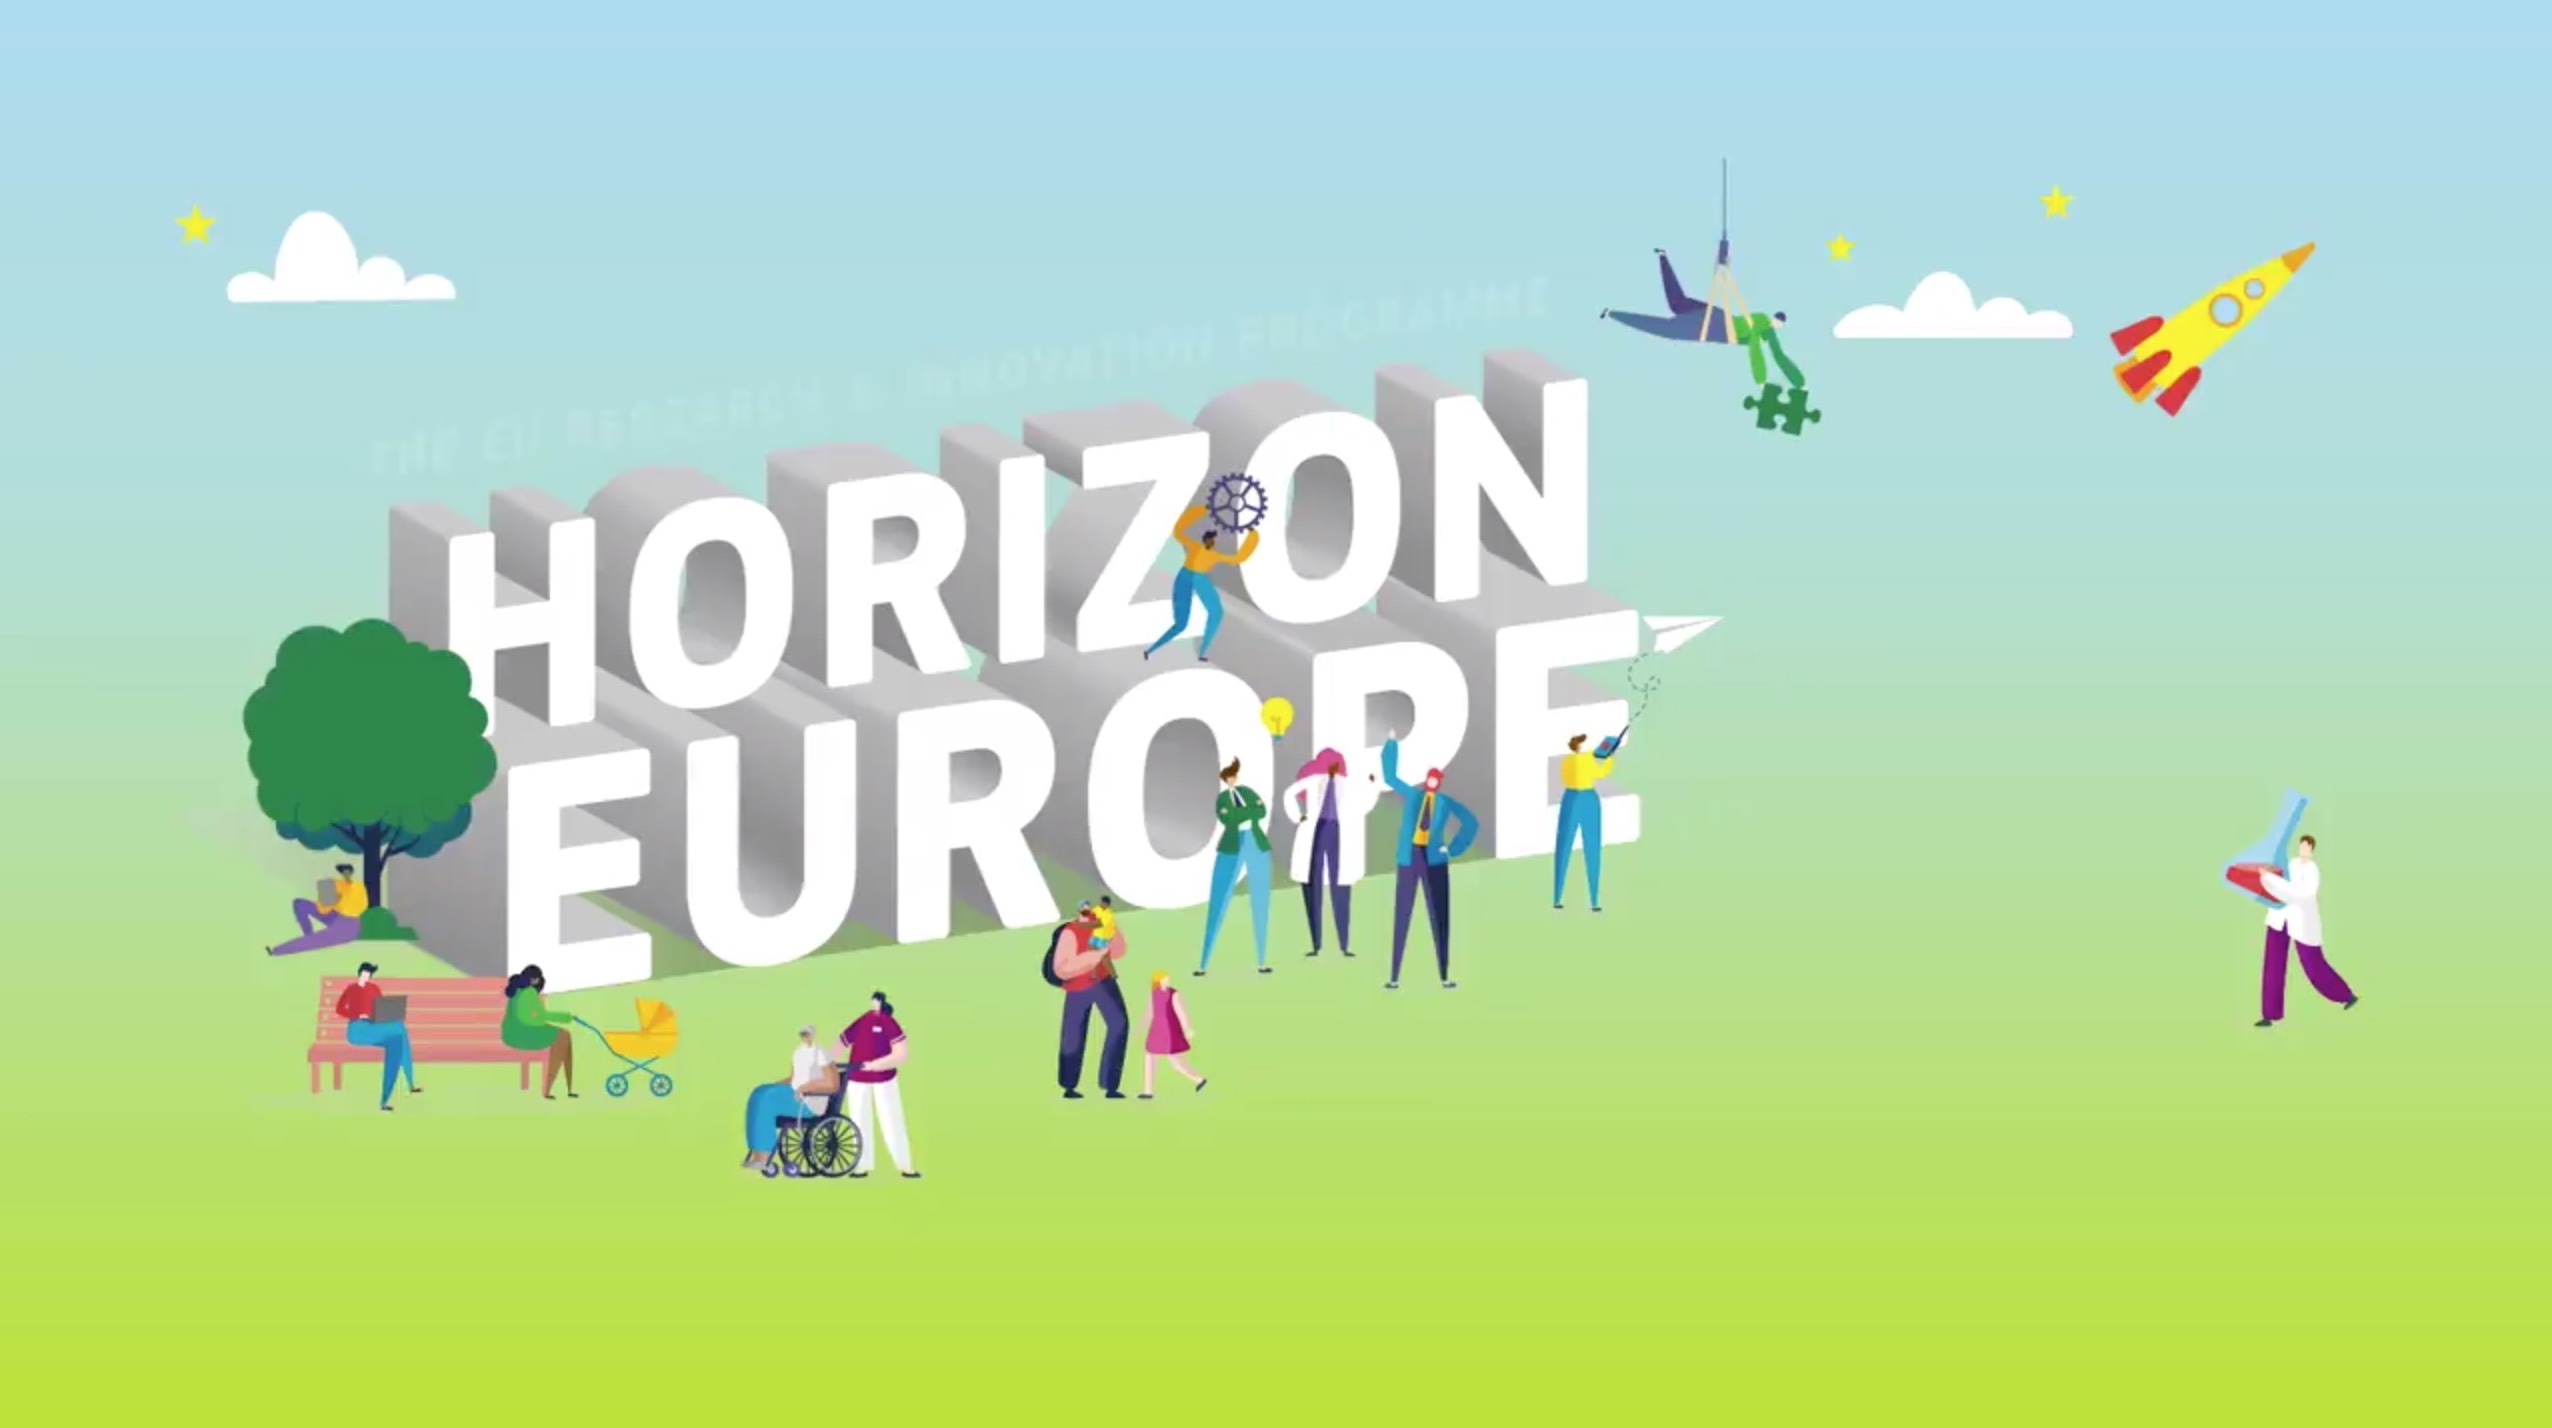 2 Horizon Europe projects approved! We continue working to improve sustainability in agri-food chains